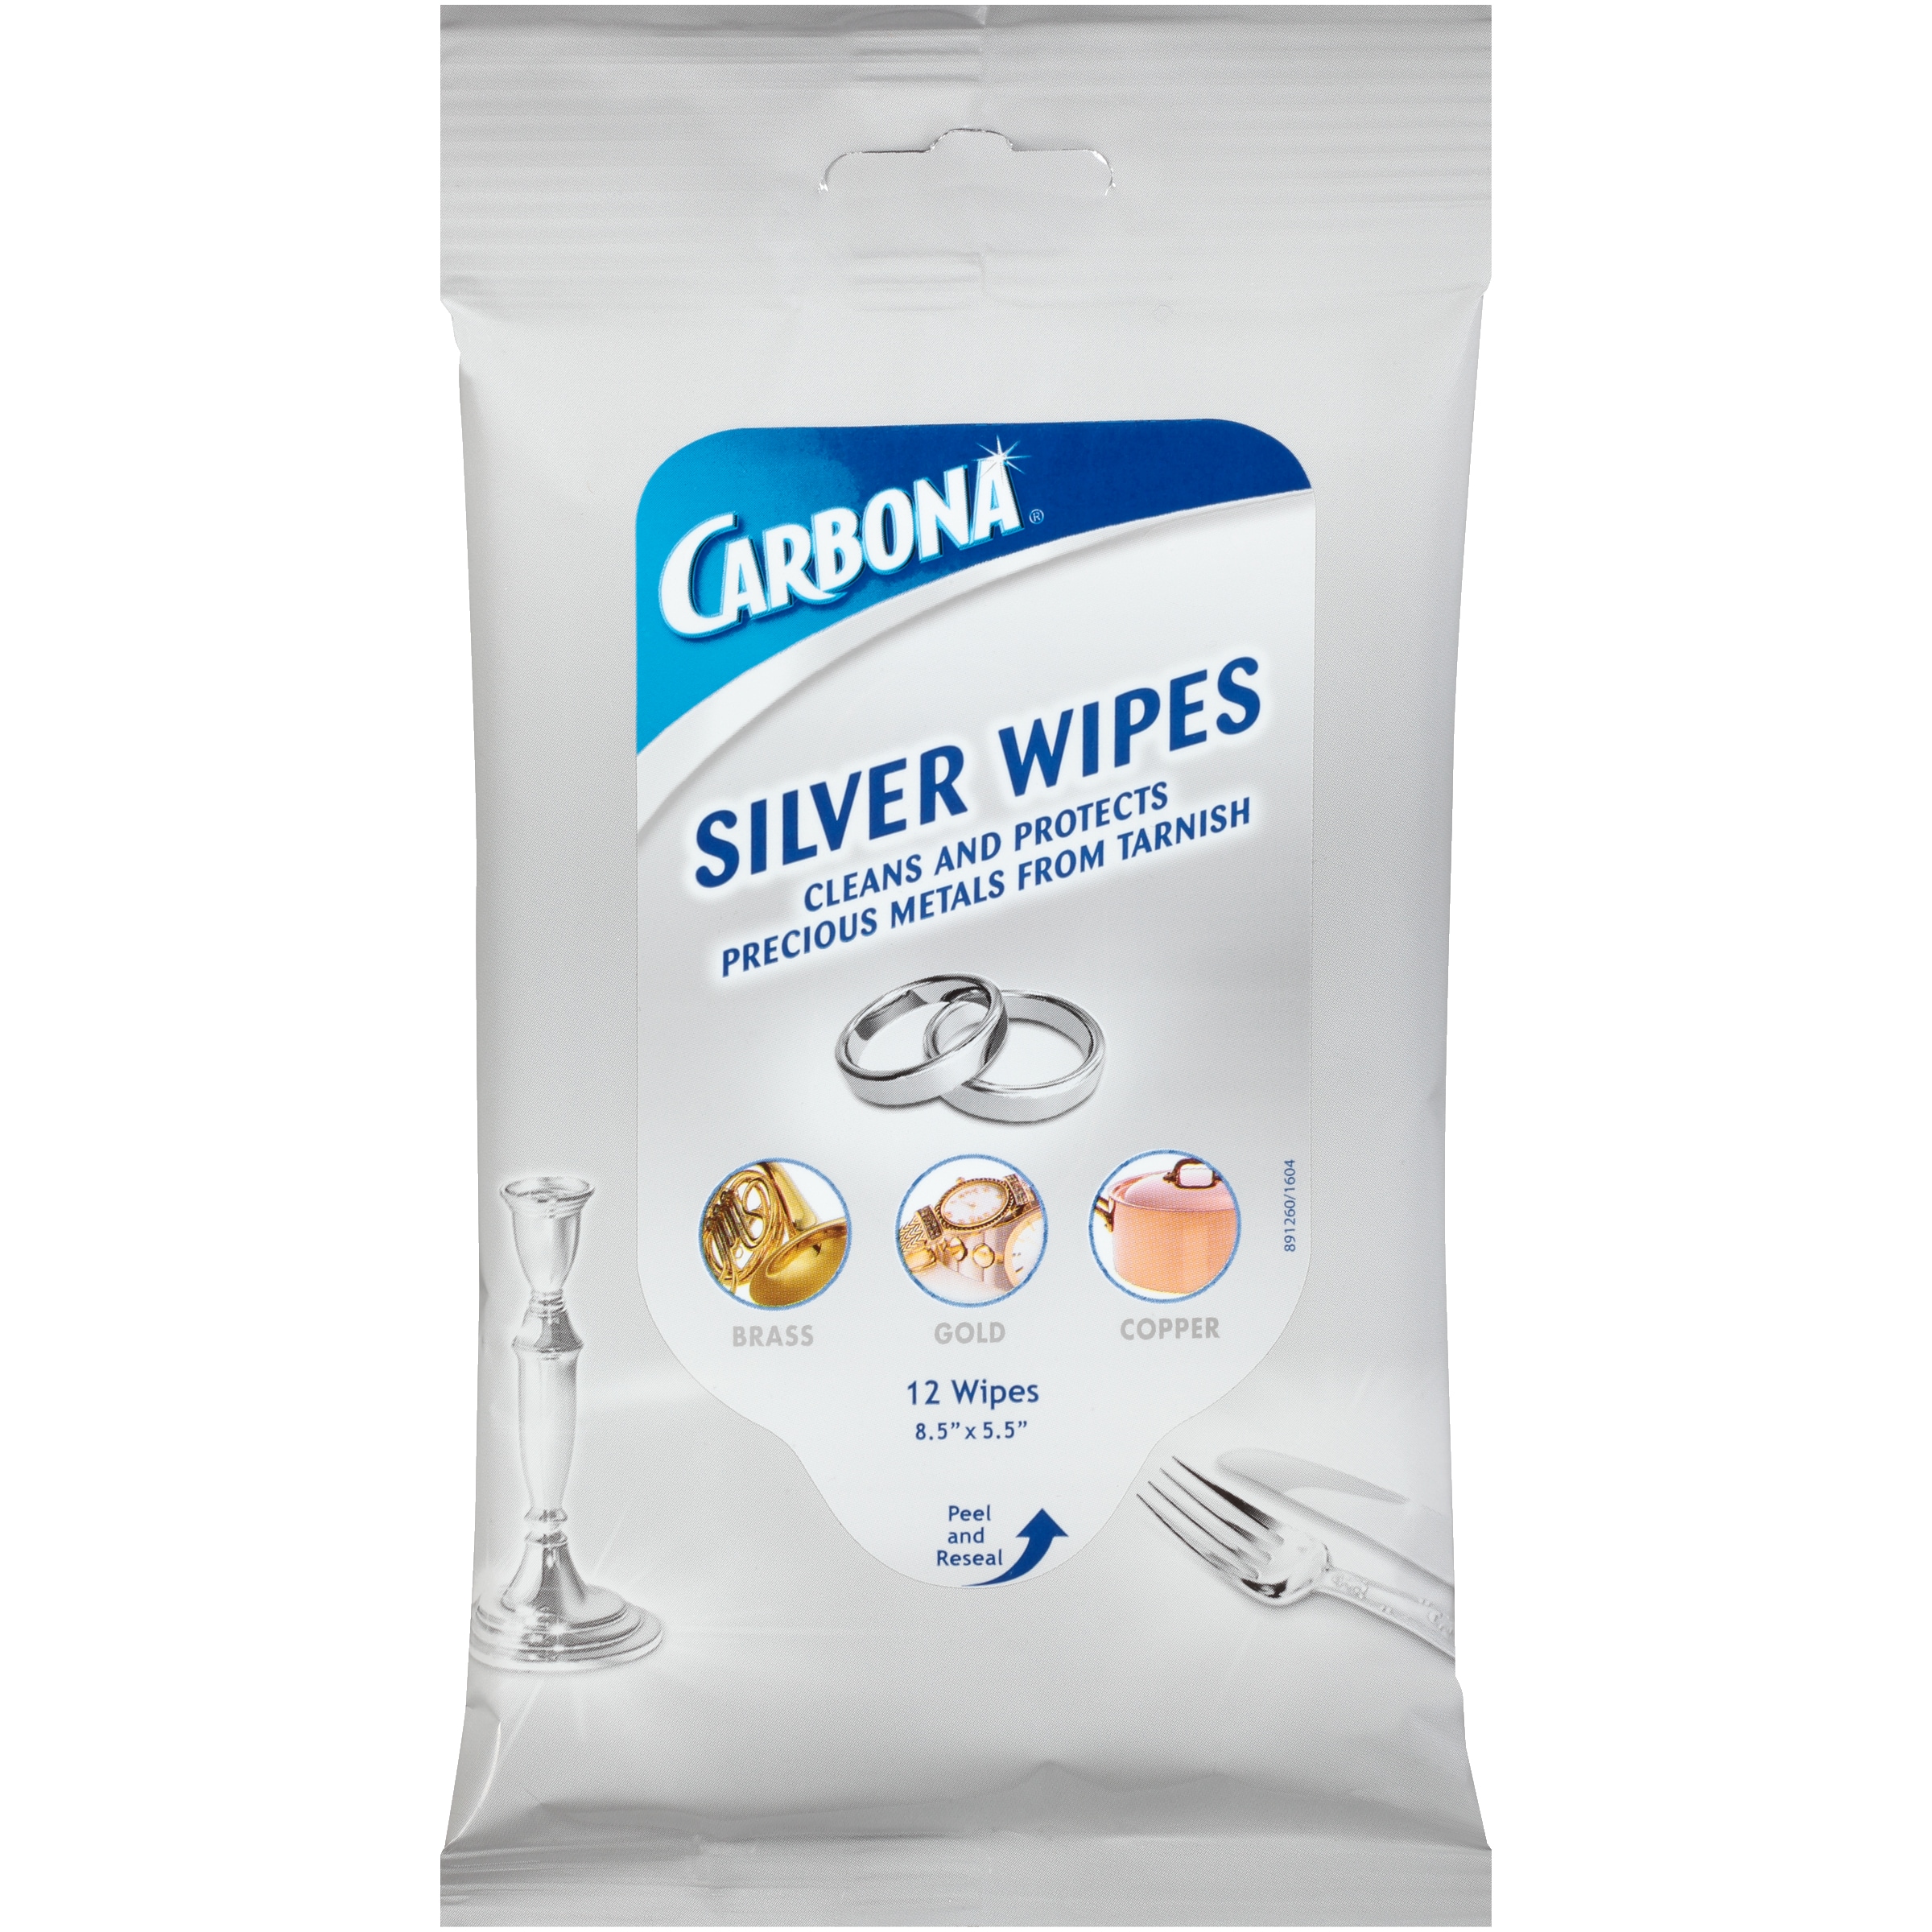 Carbona Silver Wipes | Metal Cleaner & Polish | 12 Wipes, (PK 6)